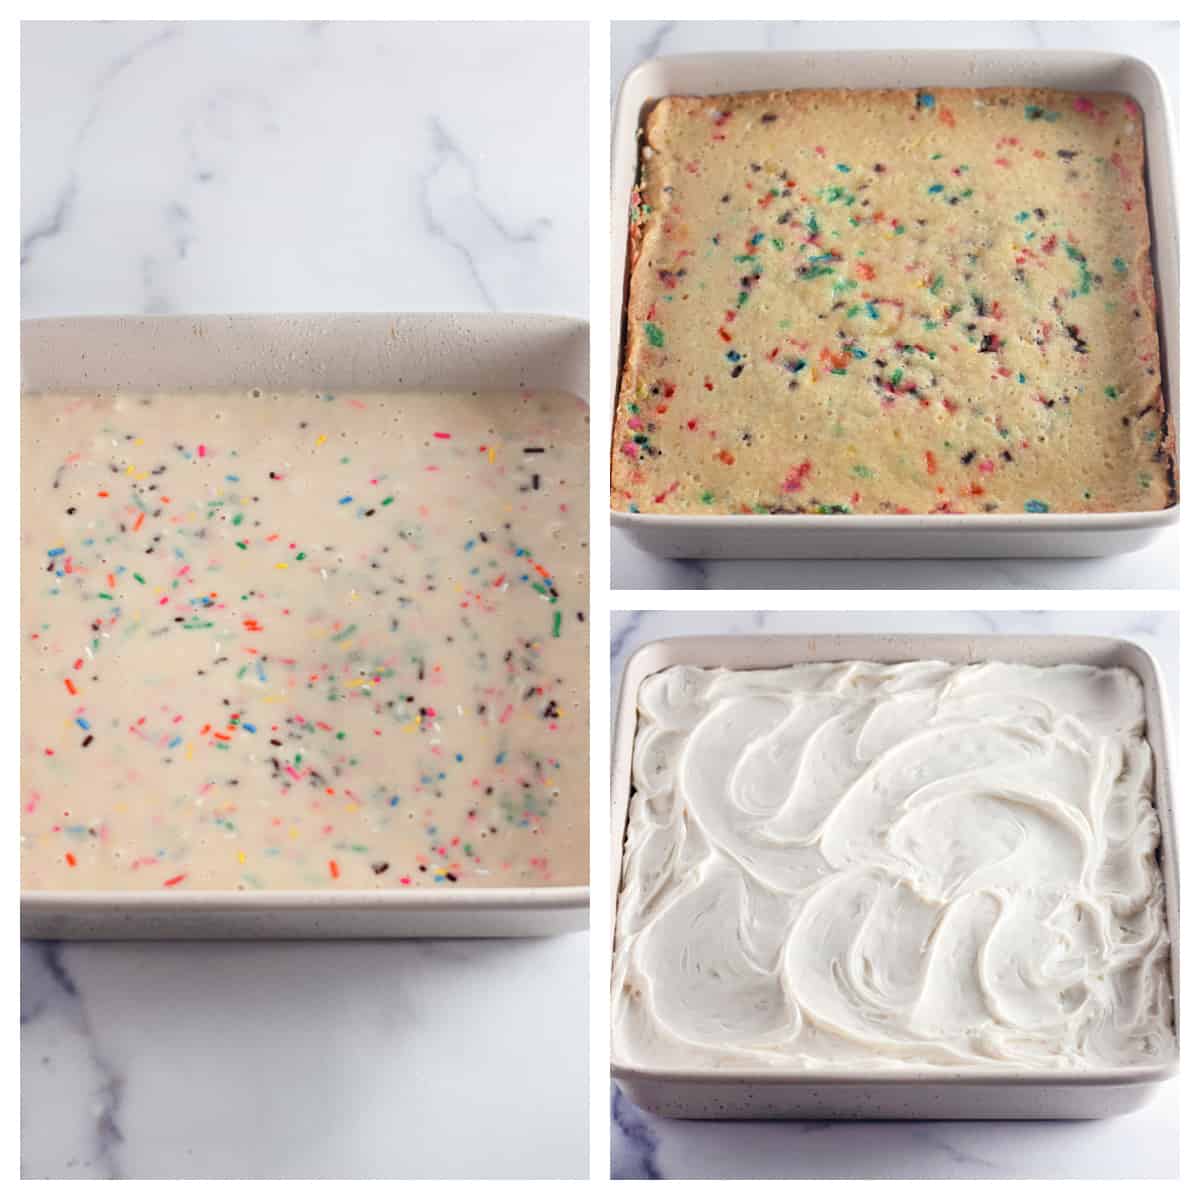 Collage of making the cake: batter in the pan, baked cake, frosted cake.